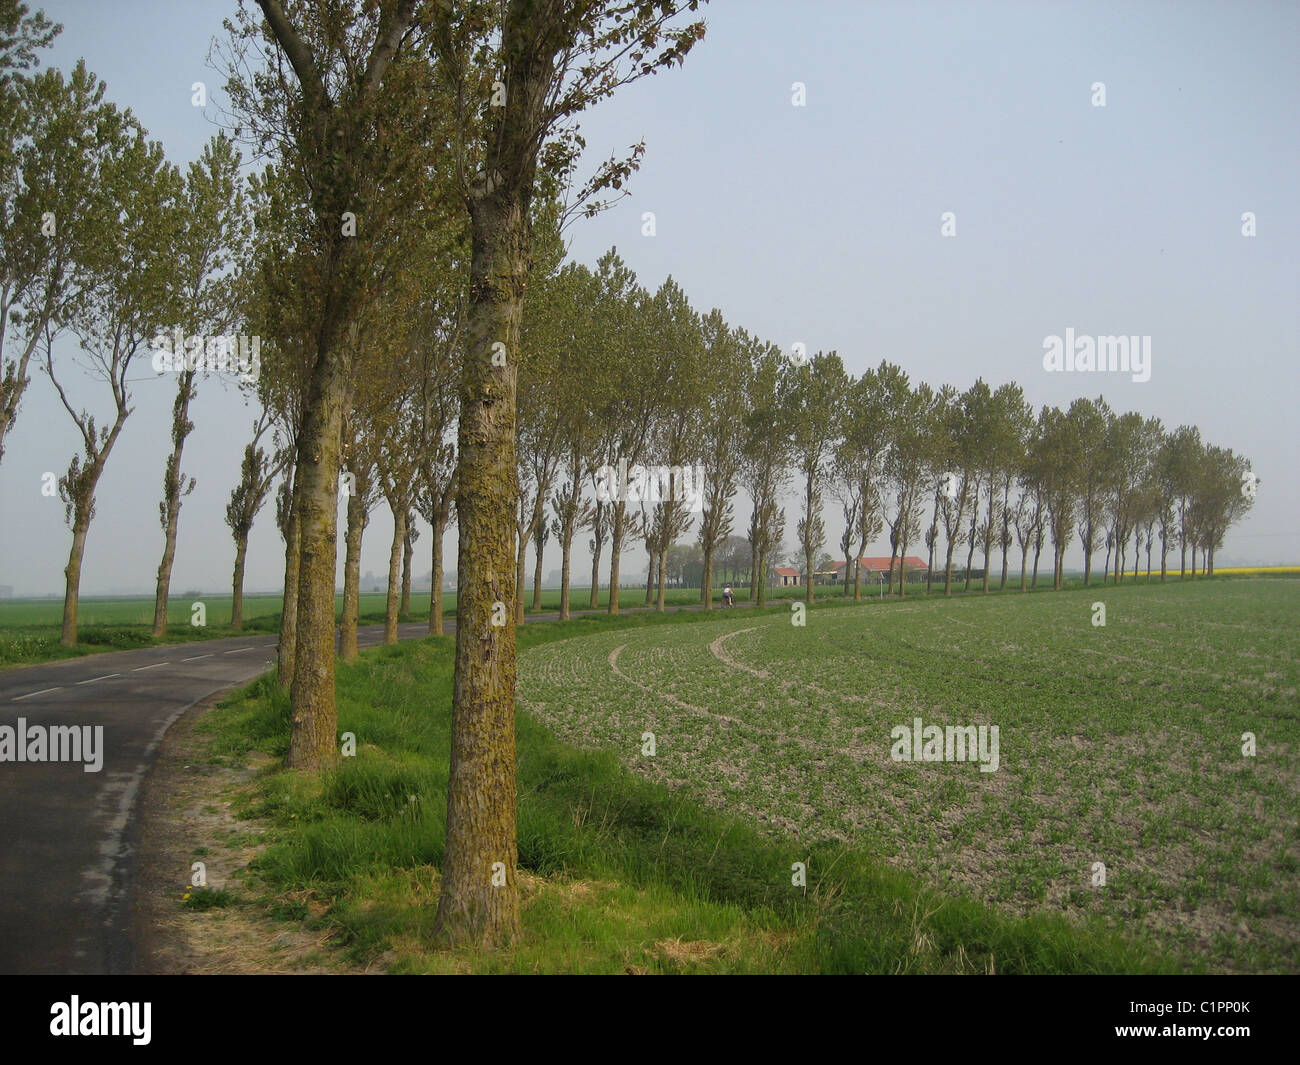 Colour picture of tall trees lining a road in the countryside in the Pas-de-Calais, northern France. Stock Photo